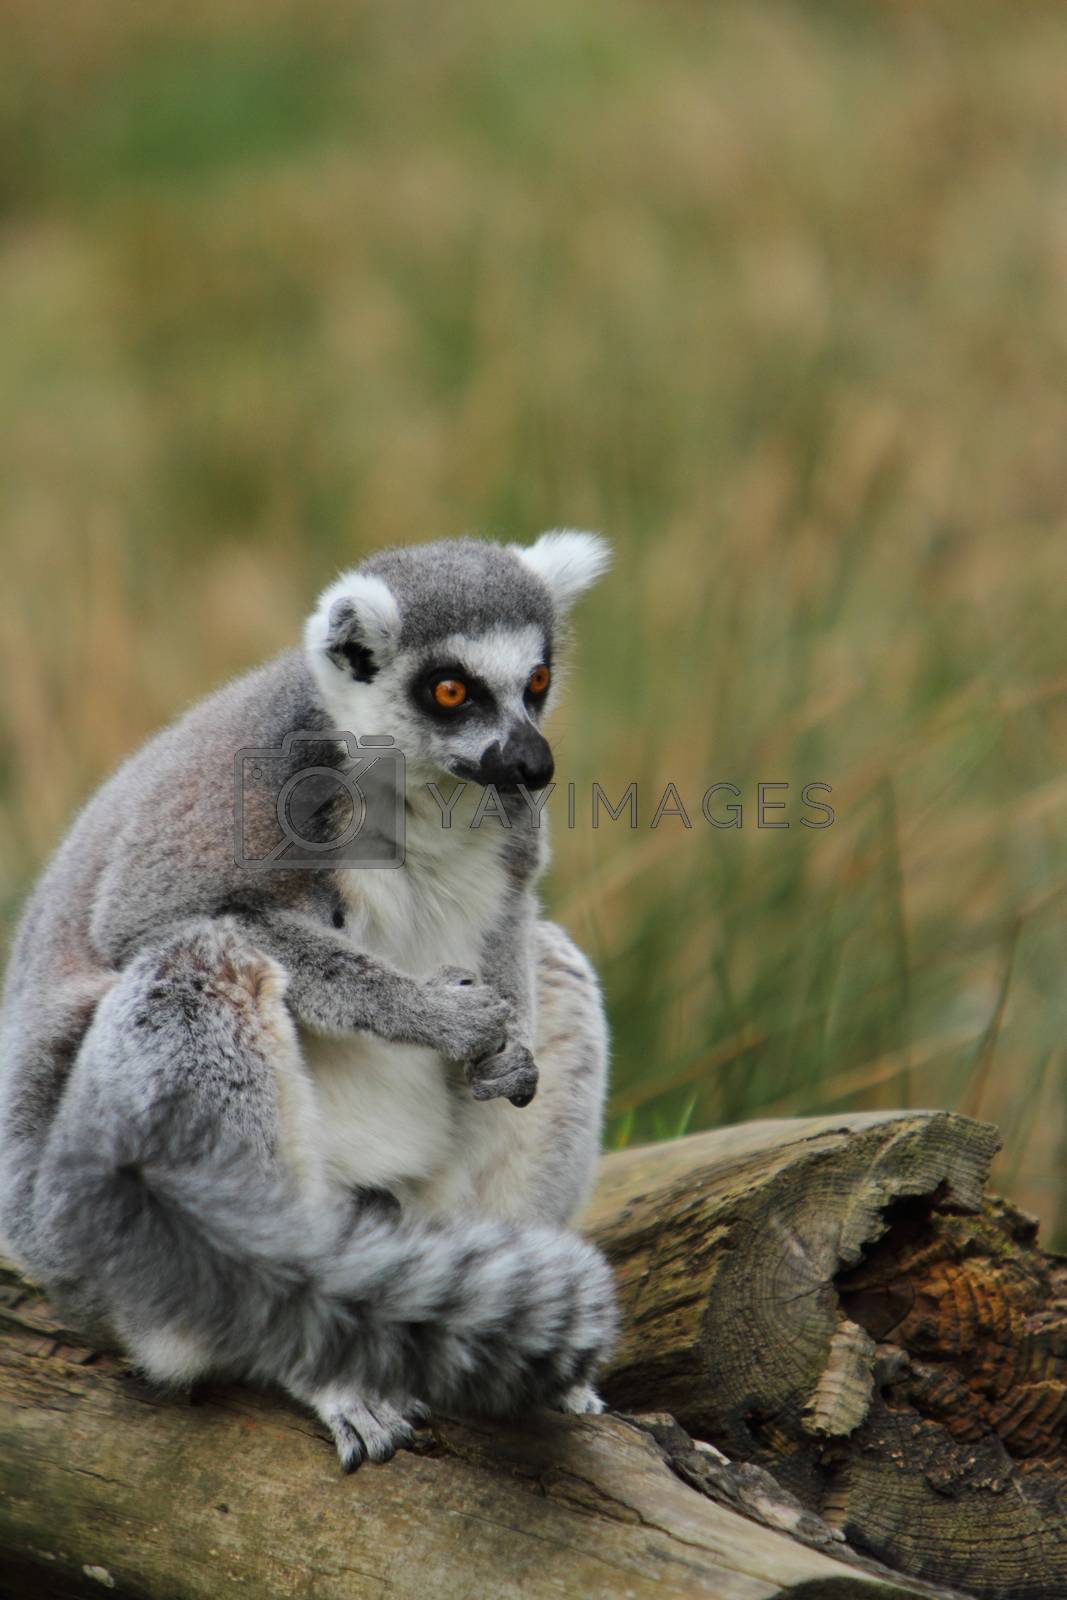 Royalty free image of Ring tailed lemur (Lemur catta) by mitzy